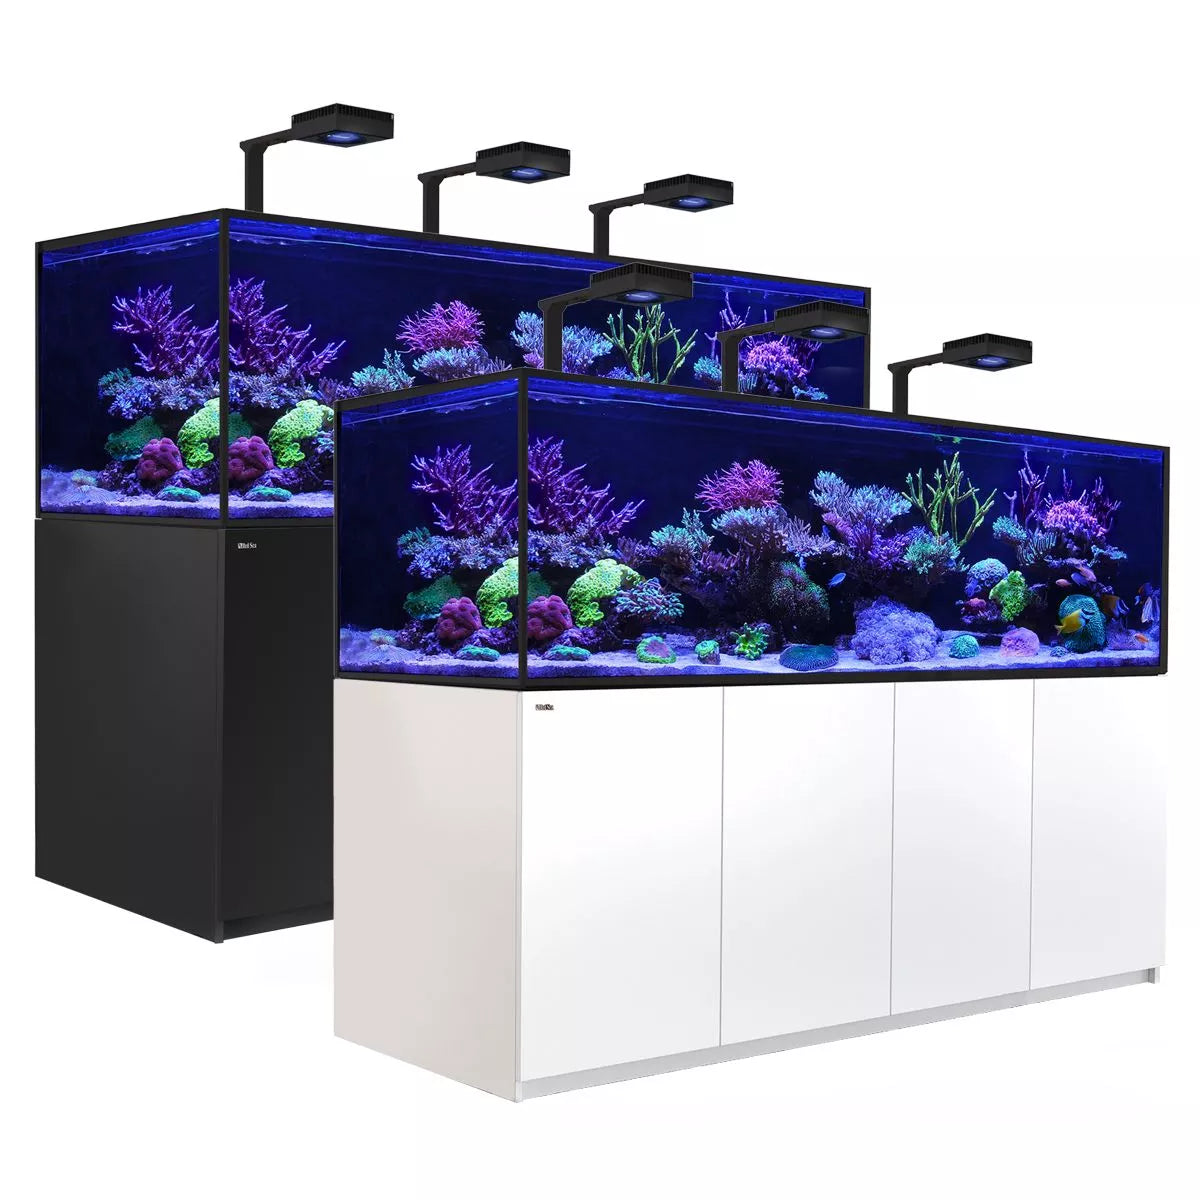 RedSea Reefer S-1000 G2+ Deluxe